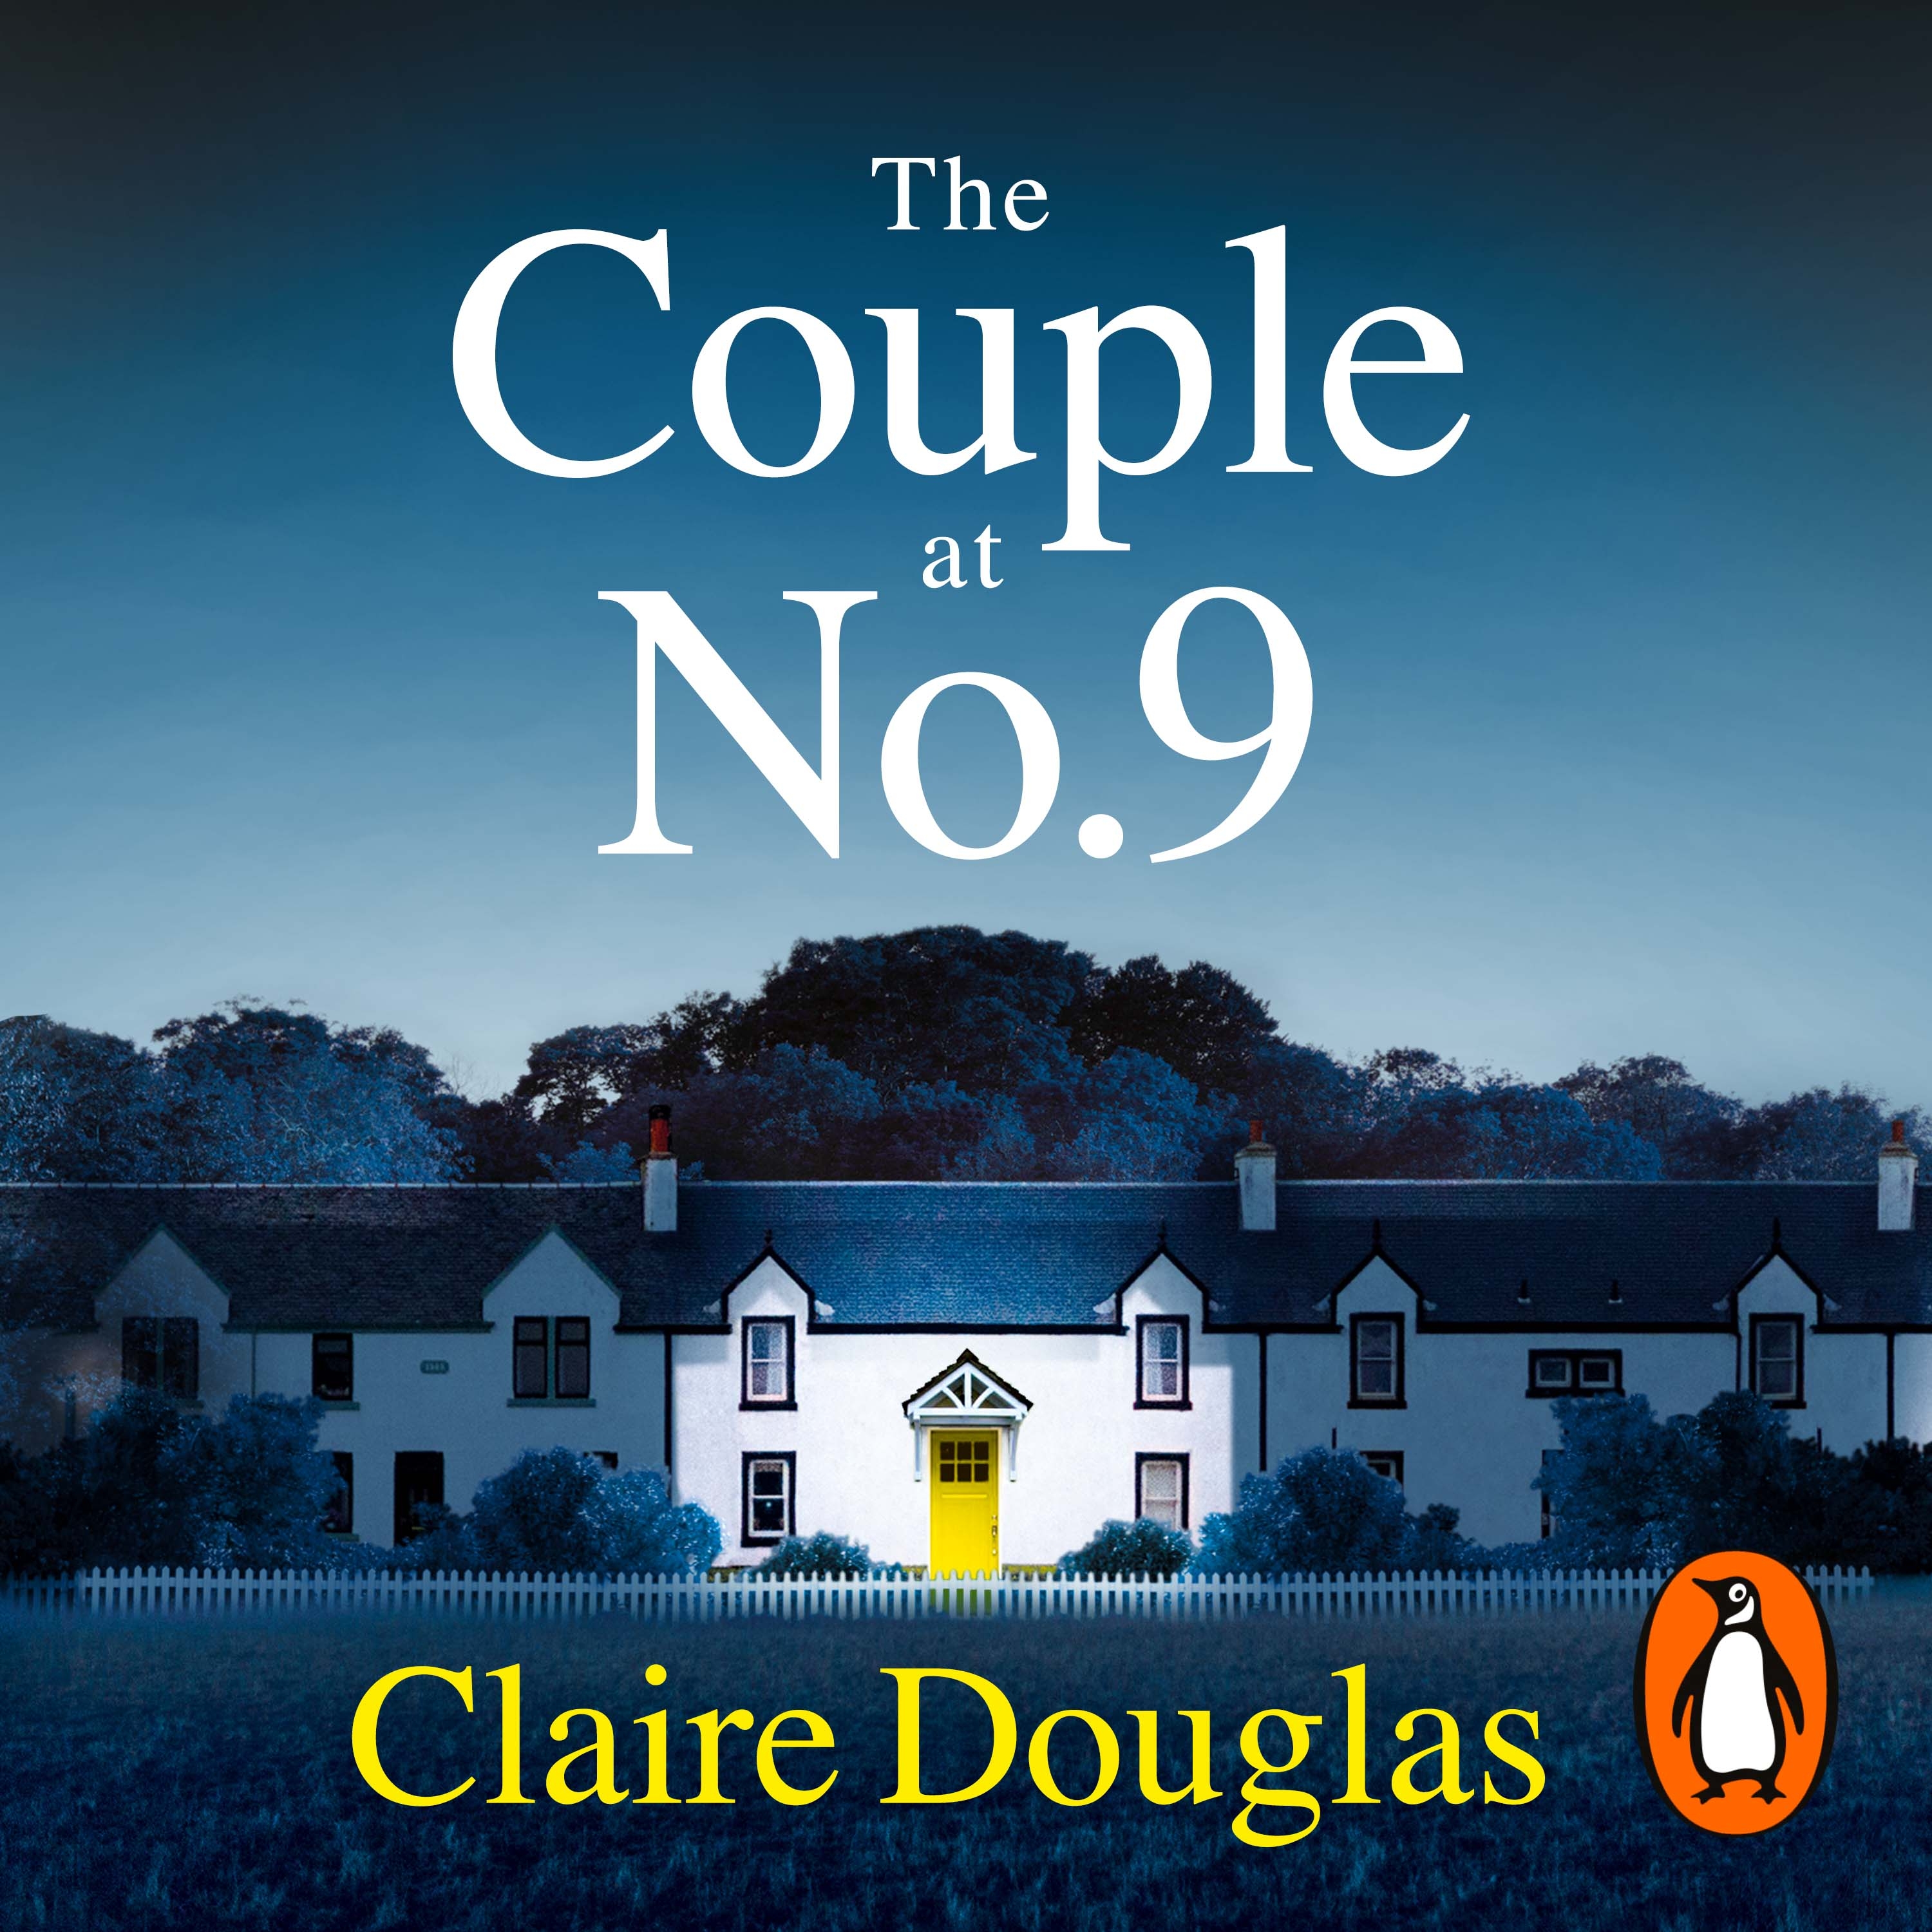 Cover of The Couple at Number 9 by Claire Douglas. Image of a house with a yellow door in the centre. The title is in large white letters at the top, and the author name in smaller yellow font at the bottom.